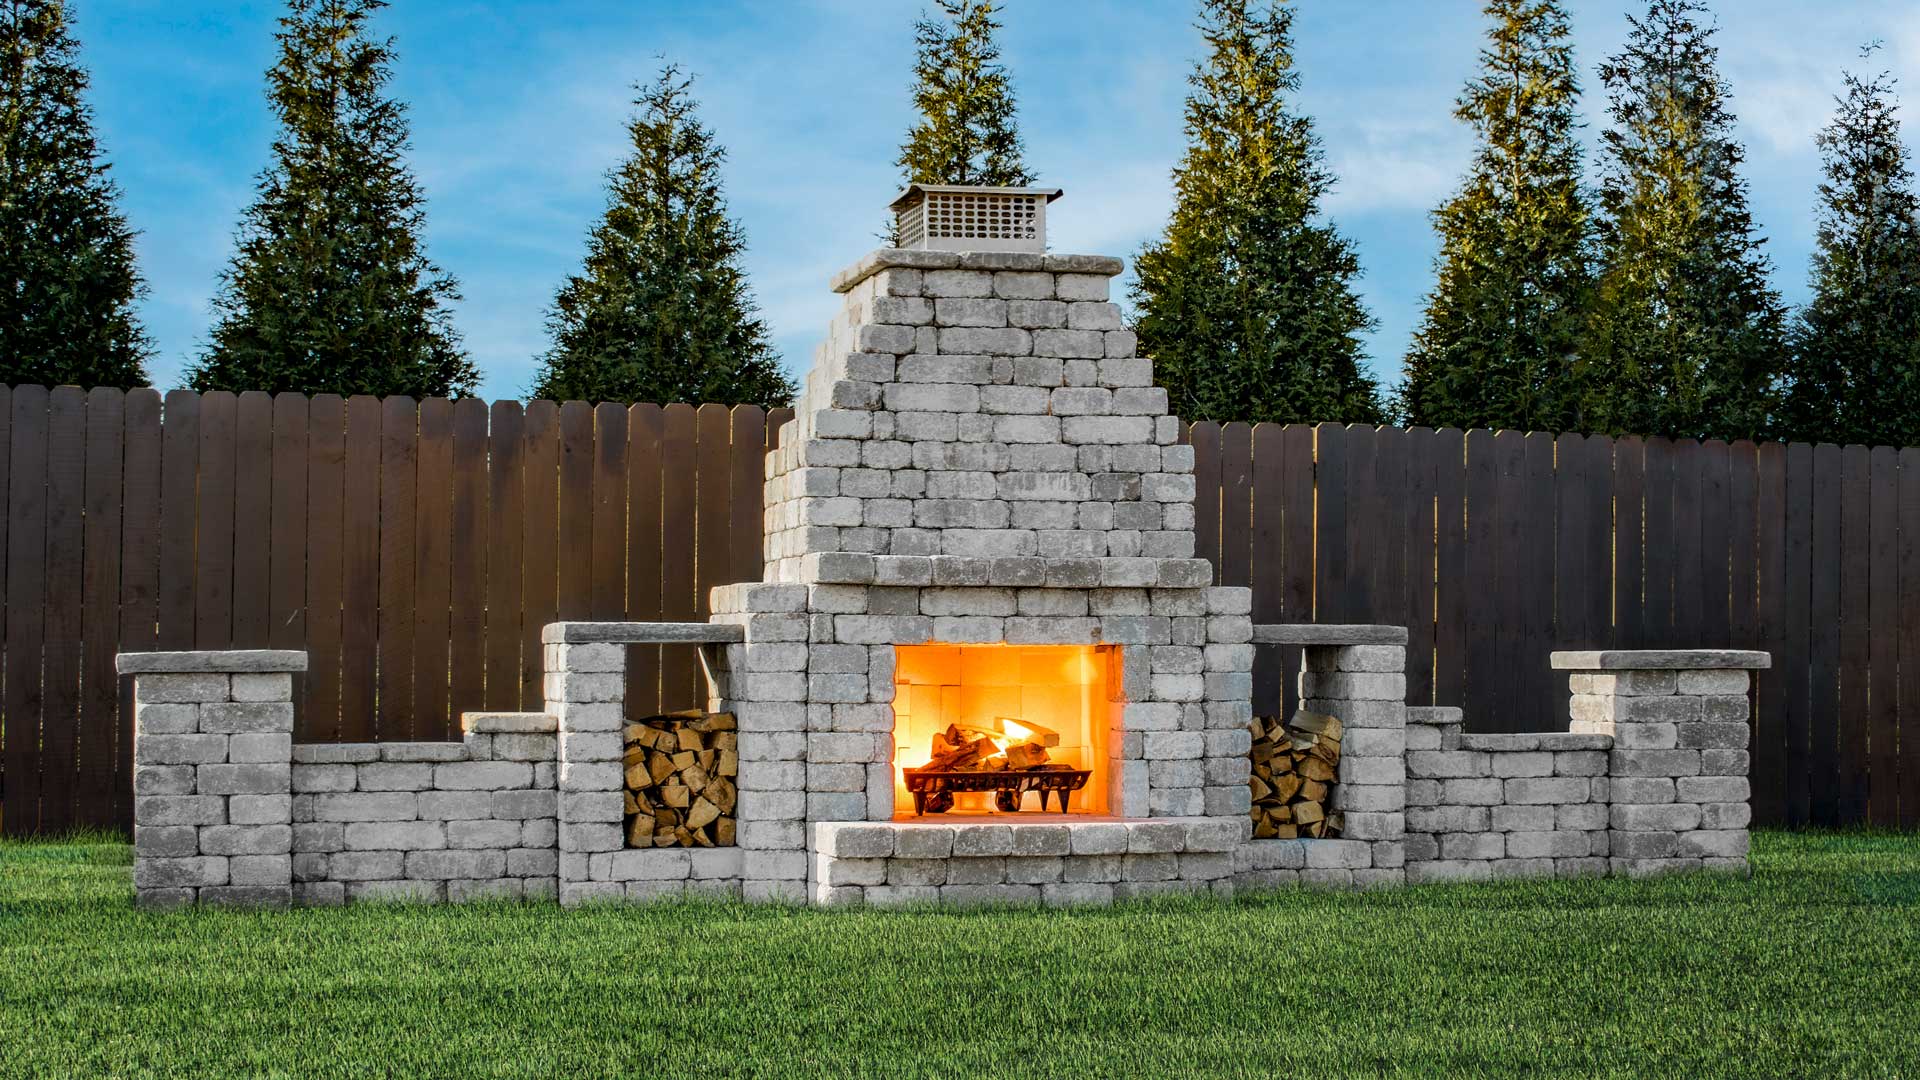 Fully loading your fireplace kit will make any backyard an extraordinary getaway